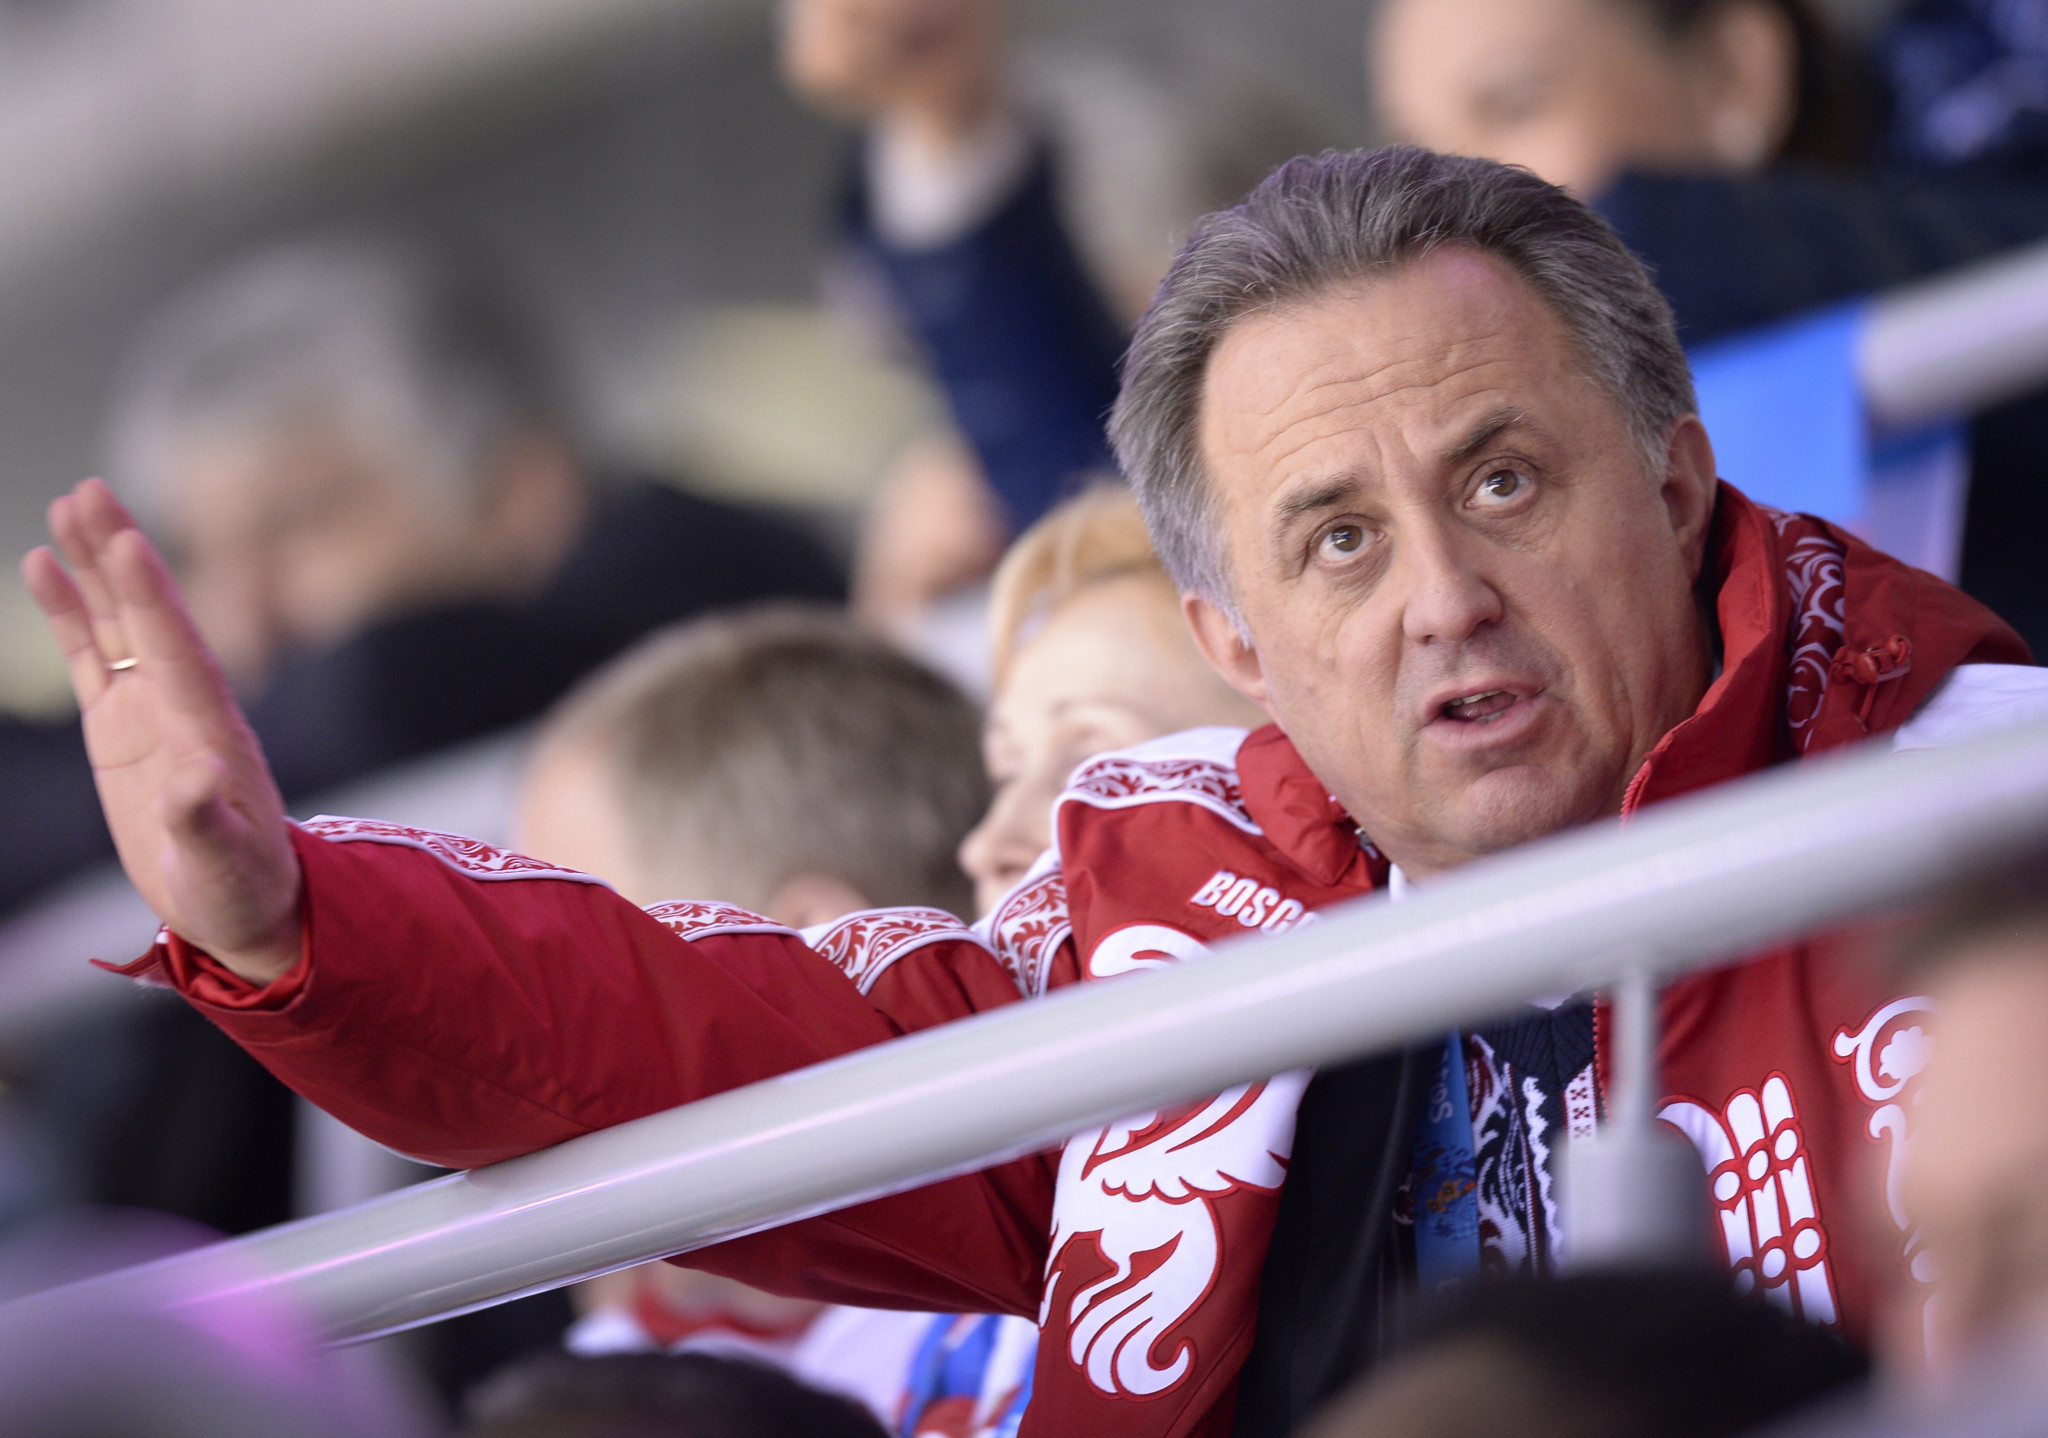 Mutko claims Russia will only pay $15 million fine to IOC if they promise to take no further action